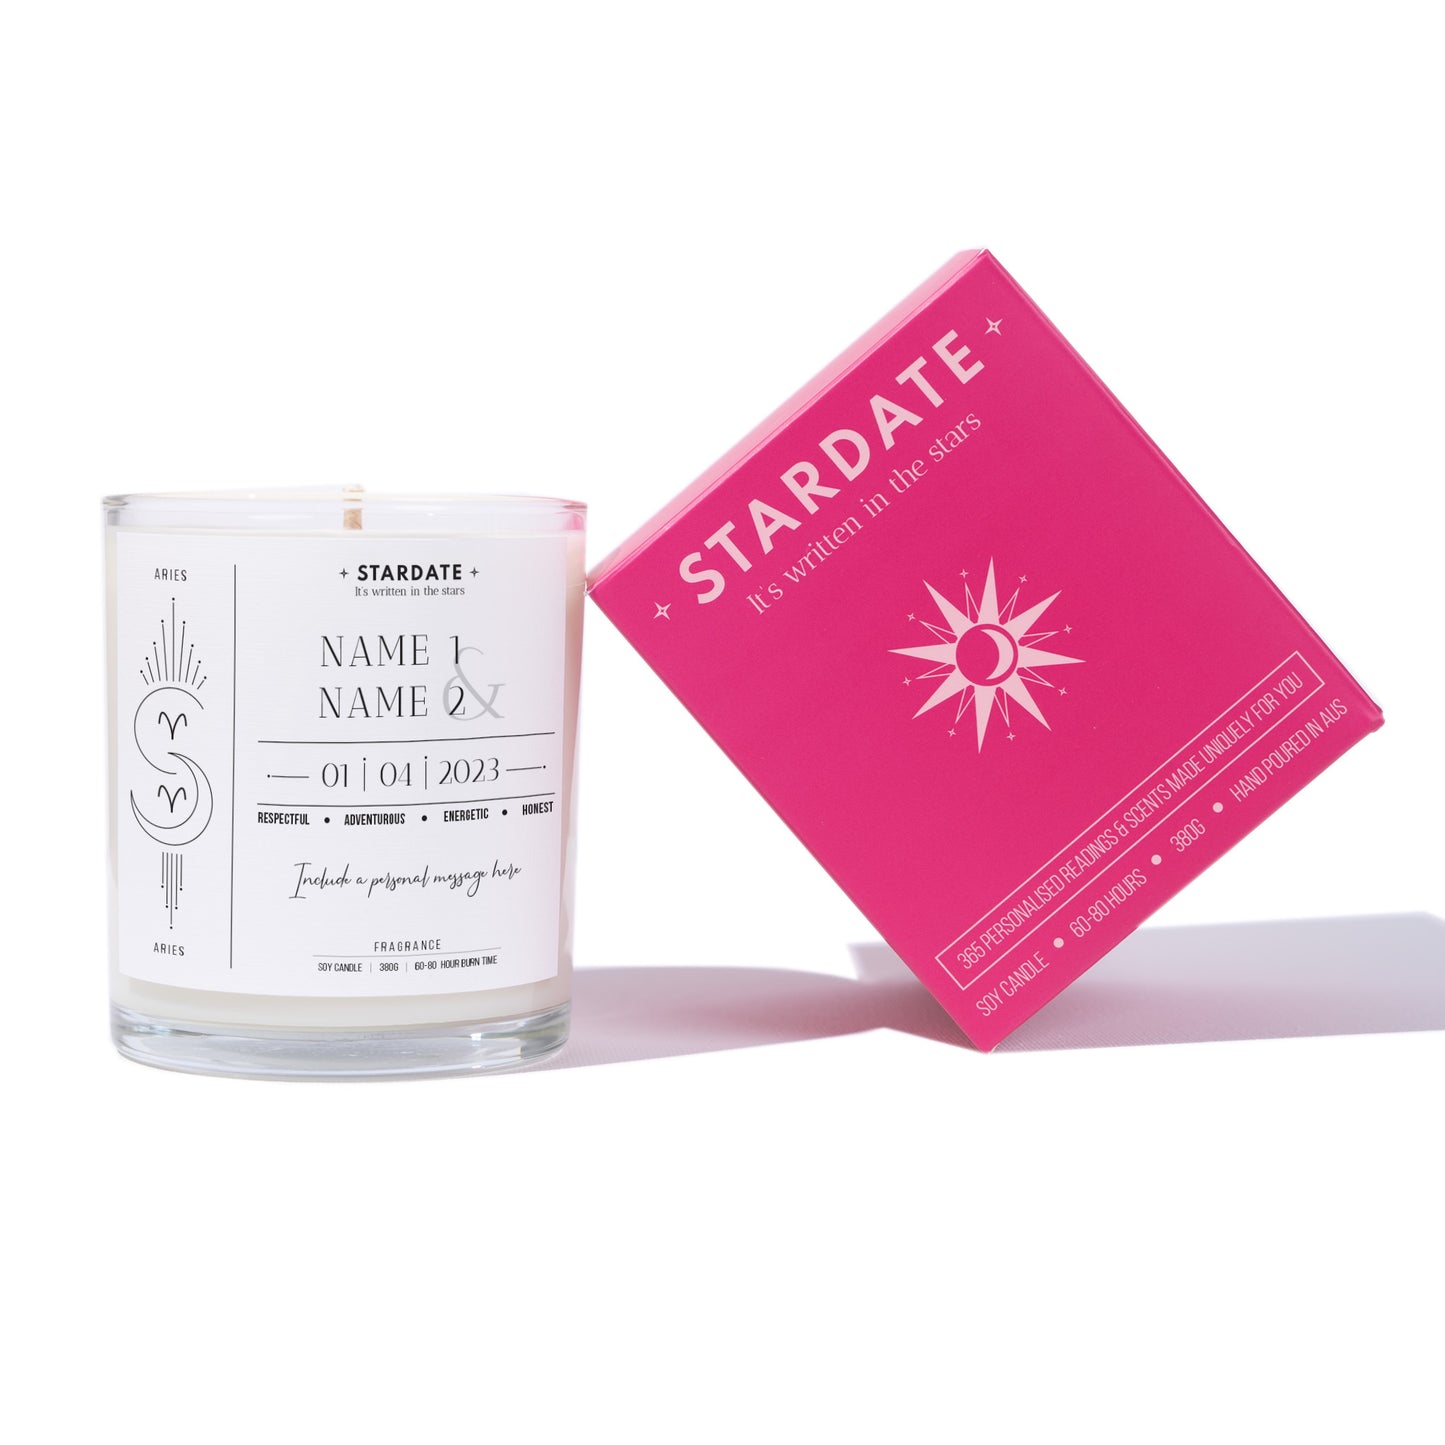 Virgo and Capricorn Compatibility Candle